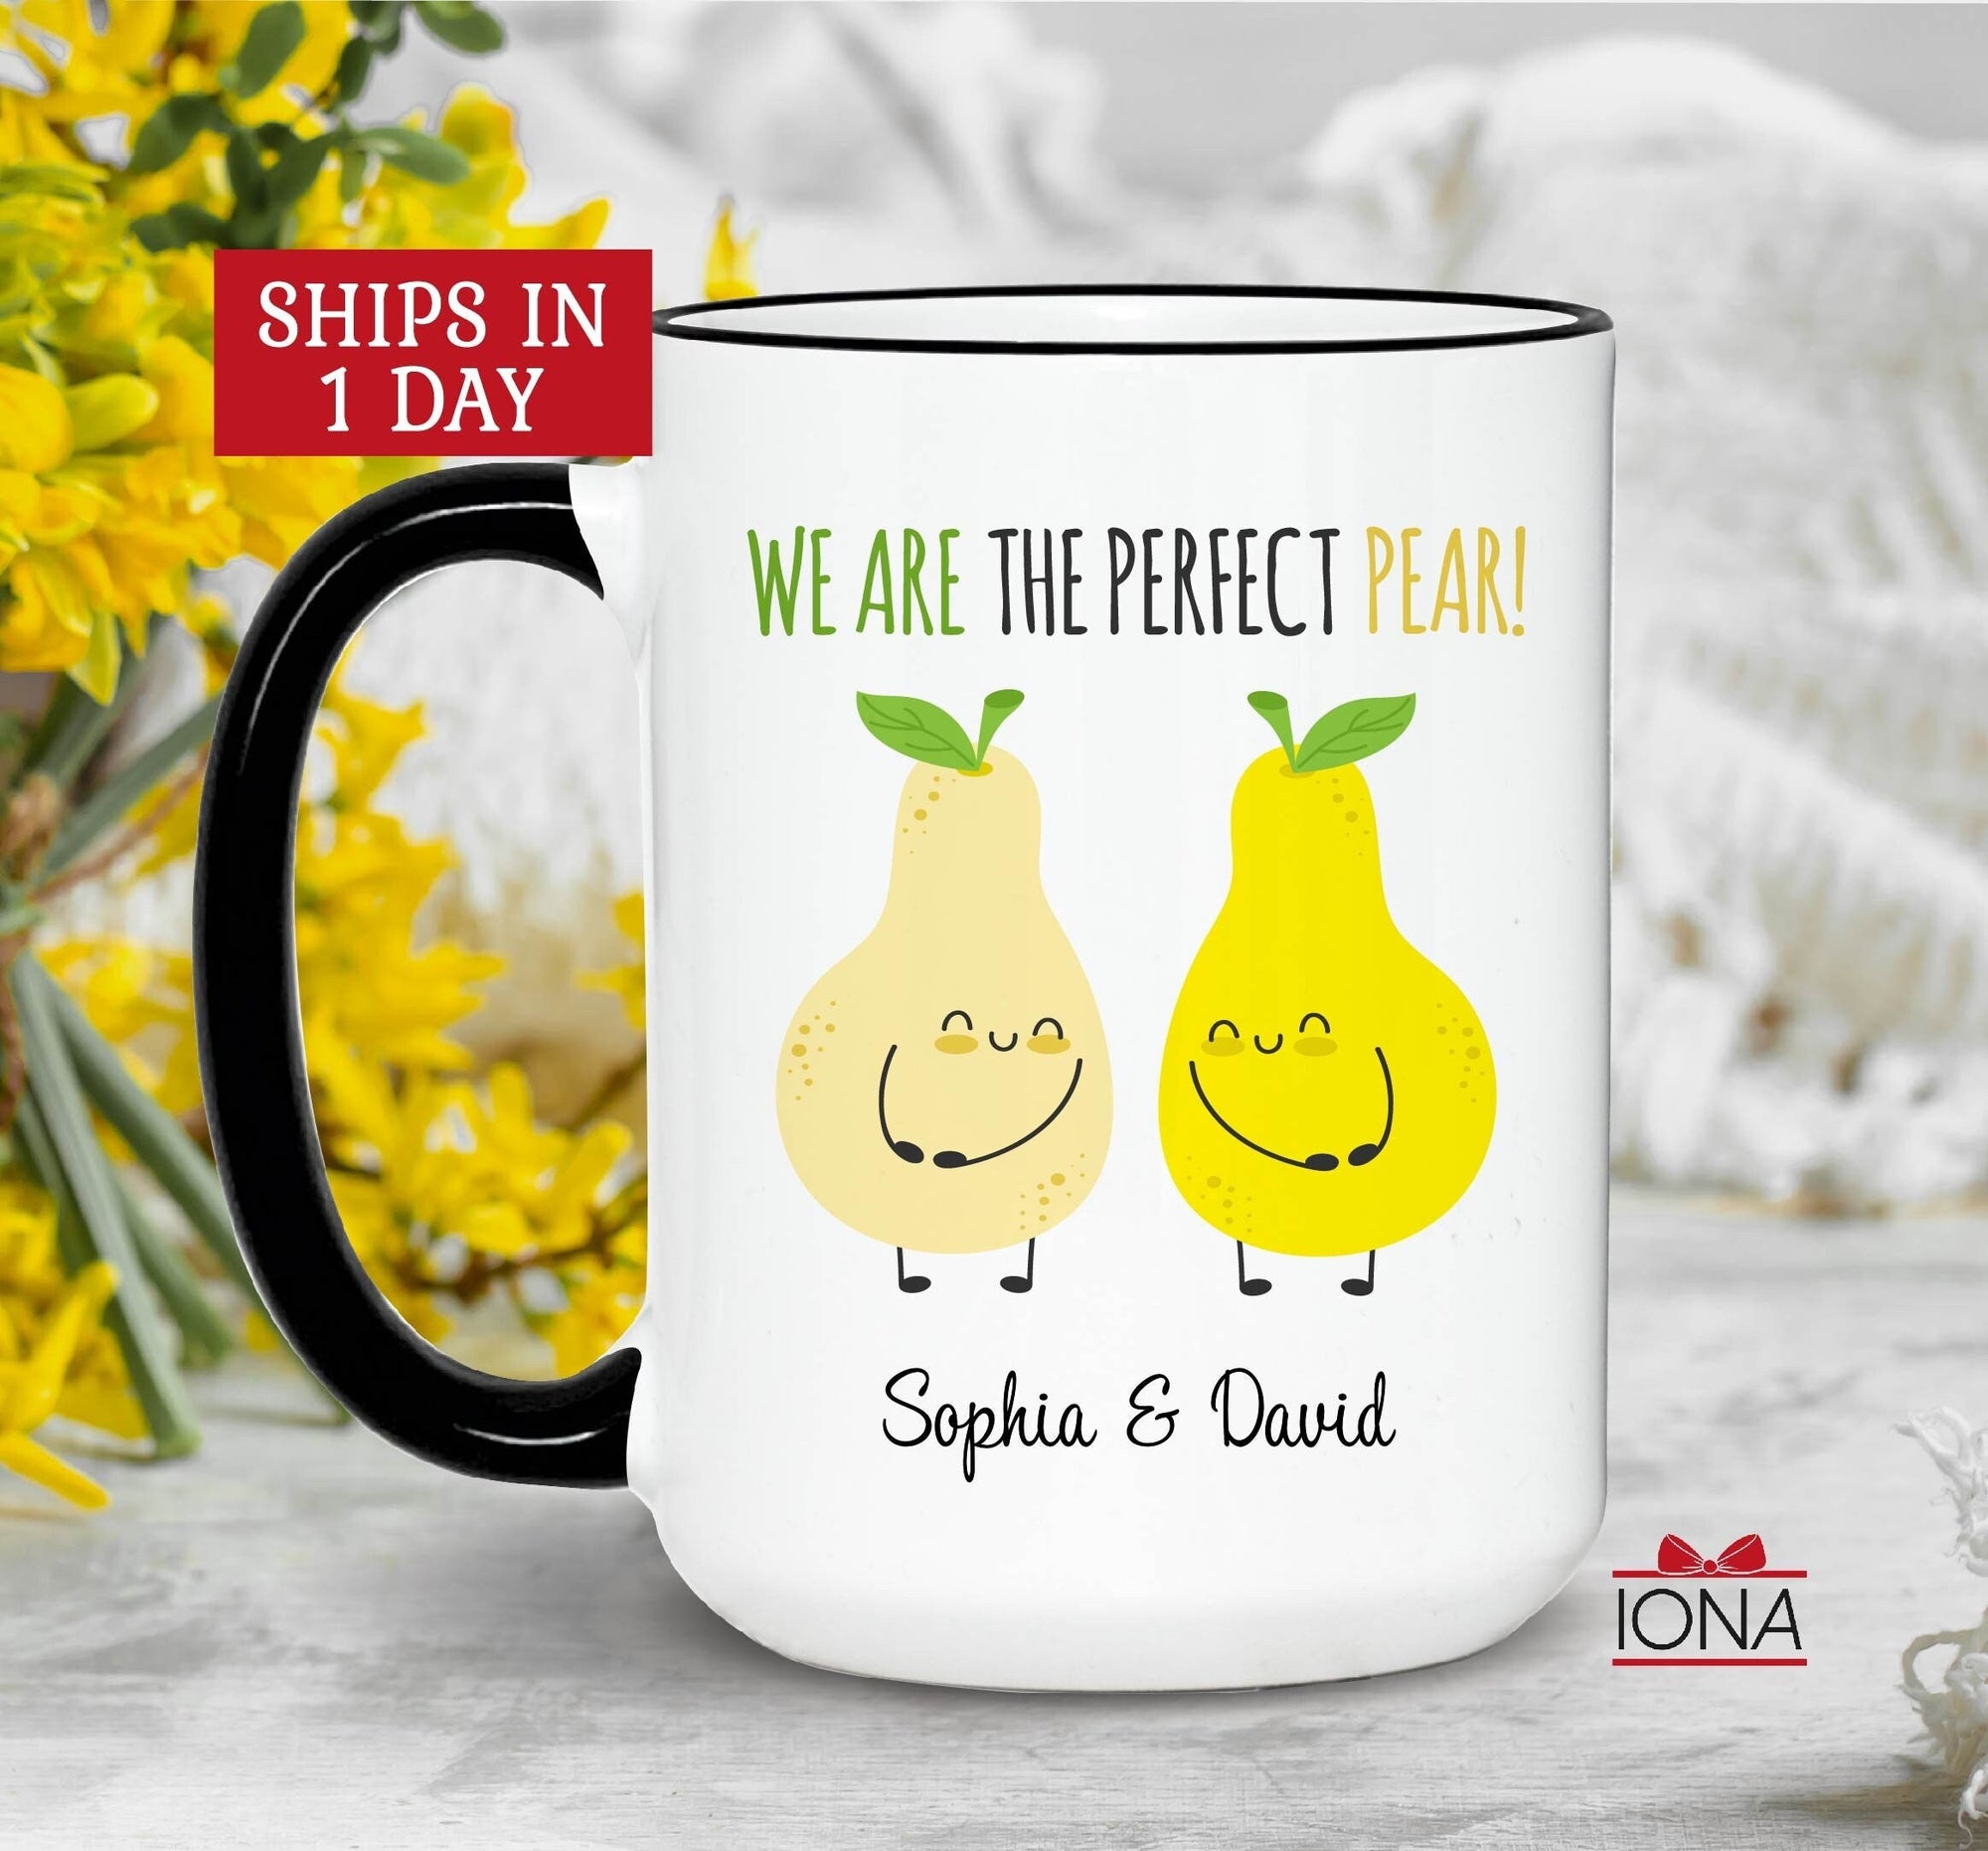 Personalized Valentines Day Pear Couple Mug, we are the perfect pear cute Cup, Romantic Boyfriend Girlfriend Gifts, Custom anniversary idea